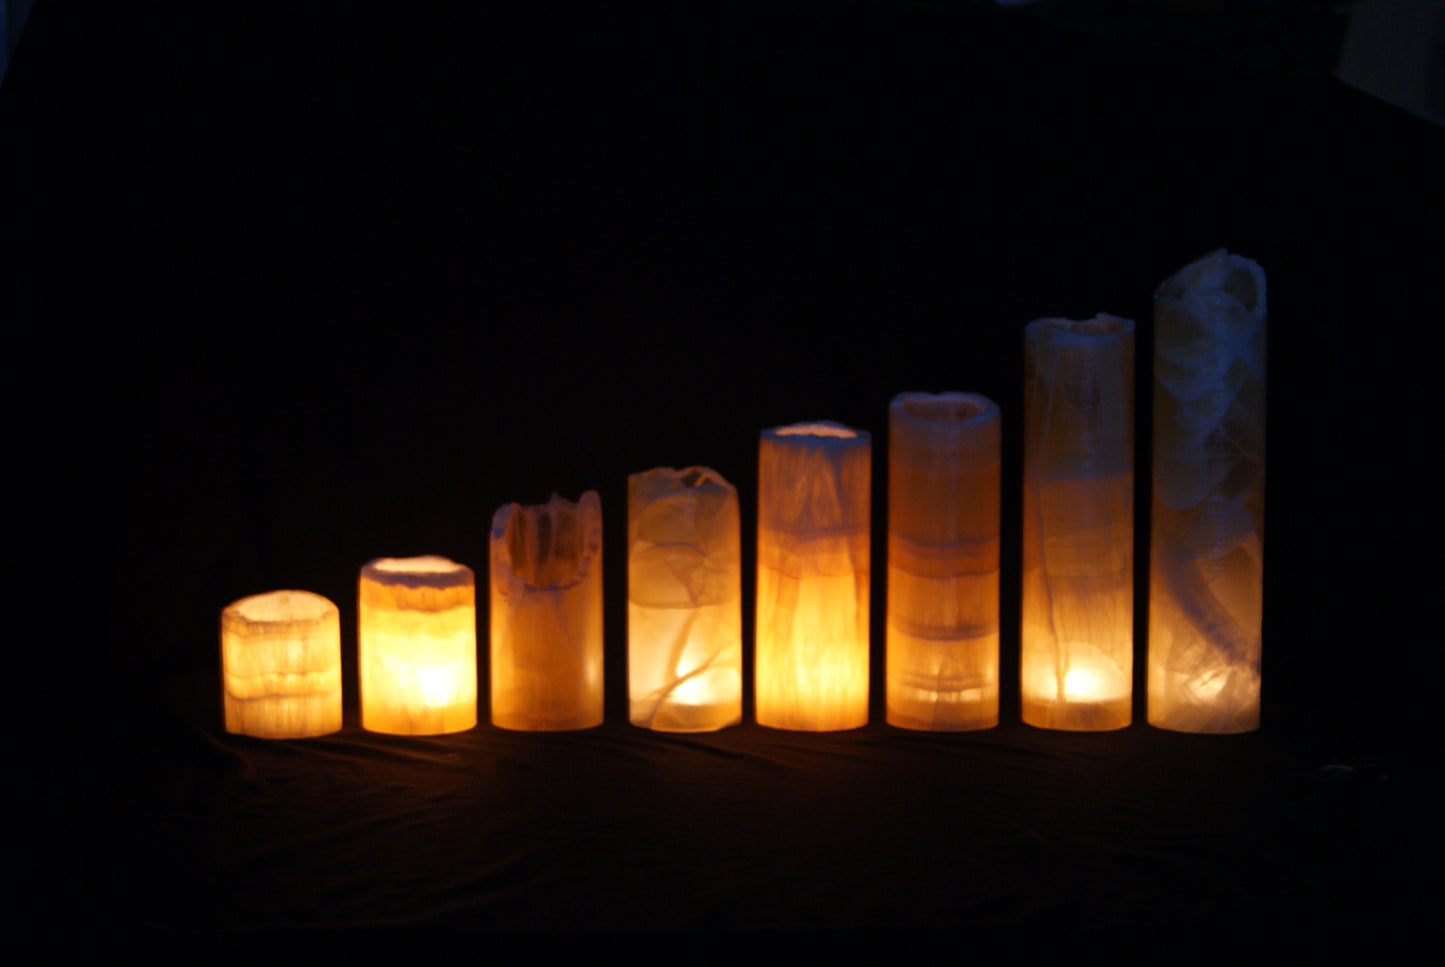 2-inch Diameter Candle Covers